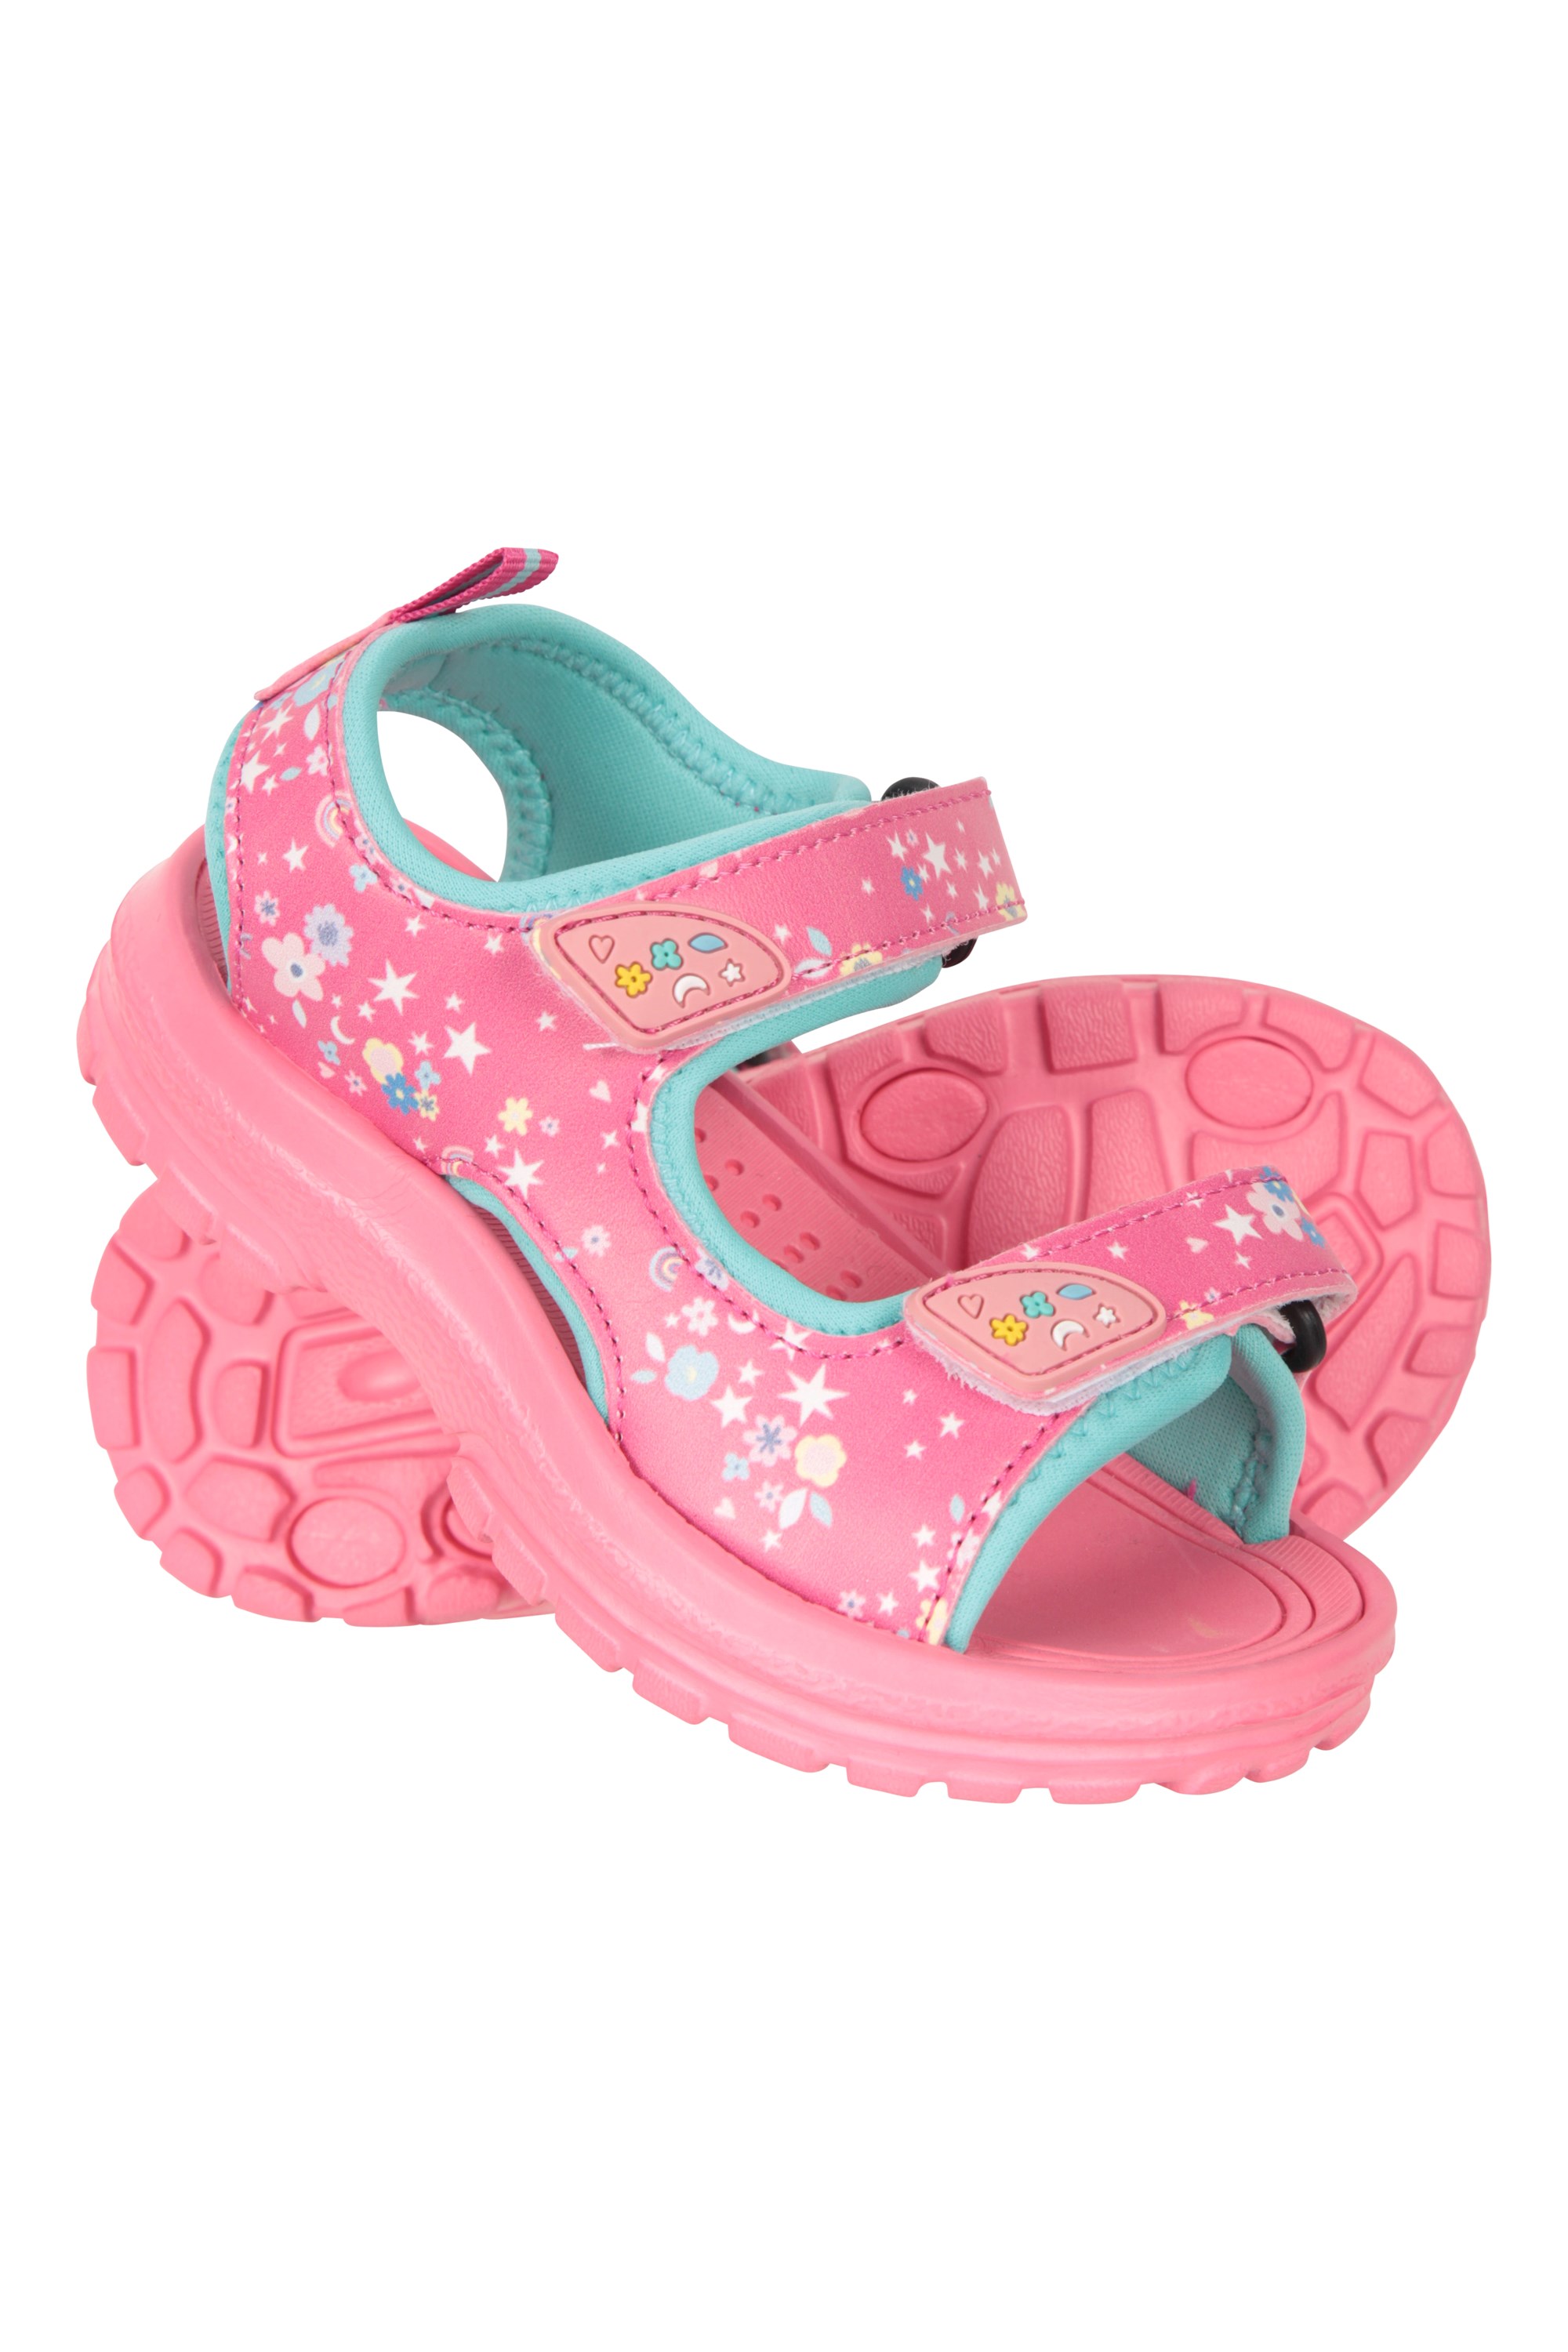 Shop Childrens Waterproof Sandals | UP TO 51% OFF